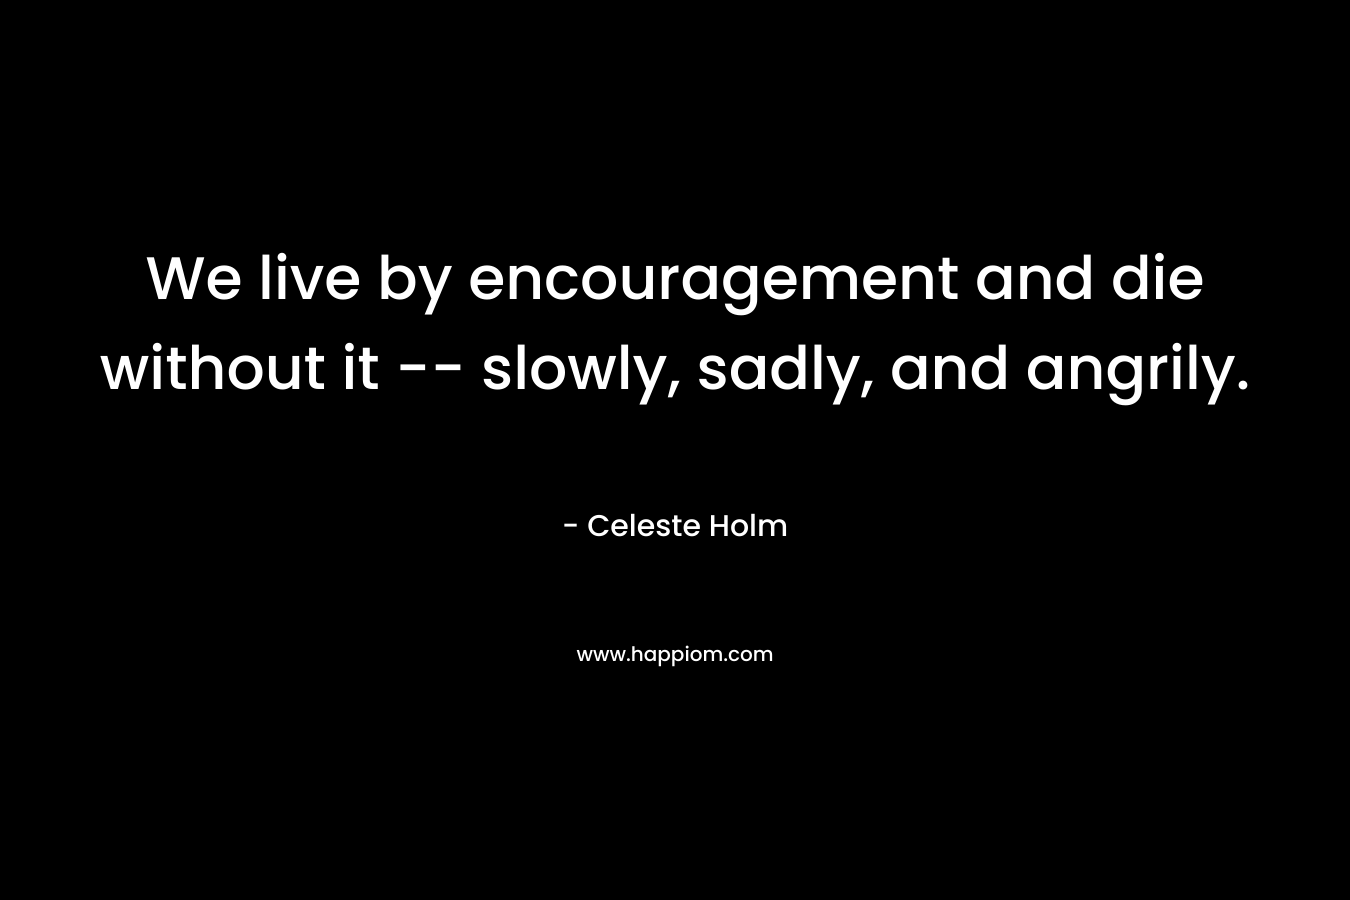 We live by encouragement and die without it -- slowly, sadly, and angrily.